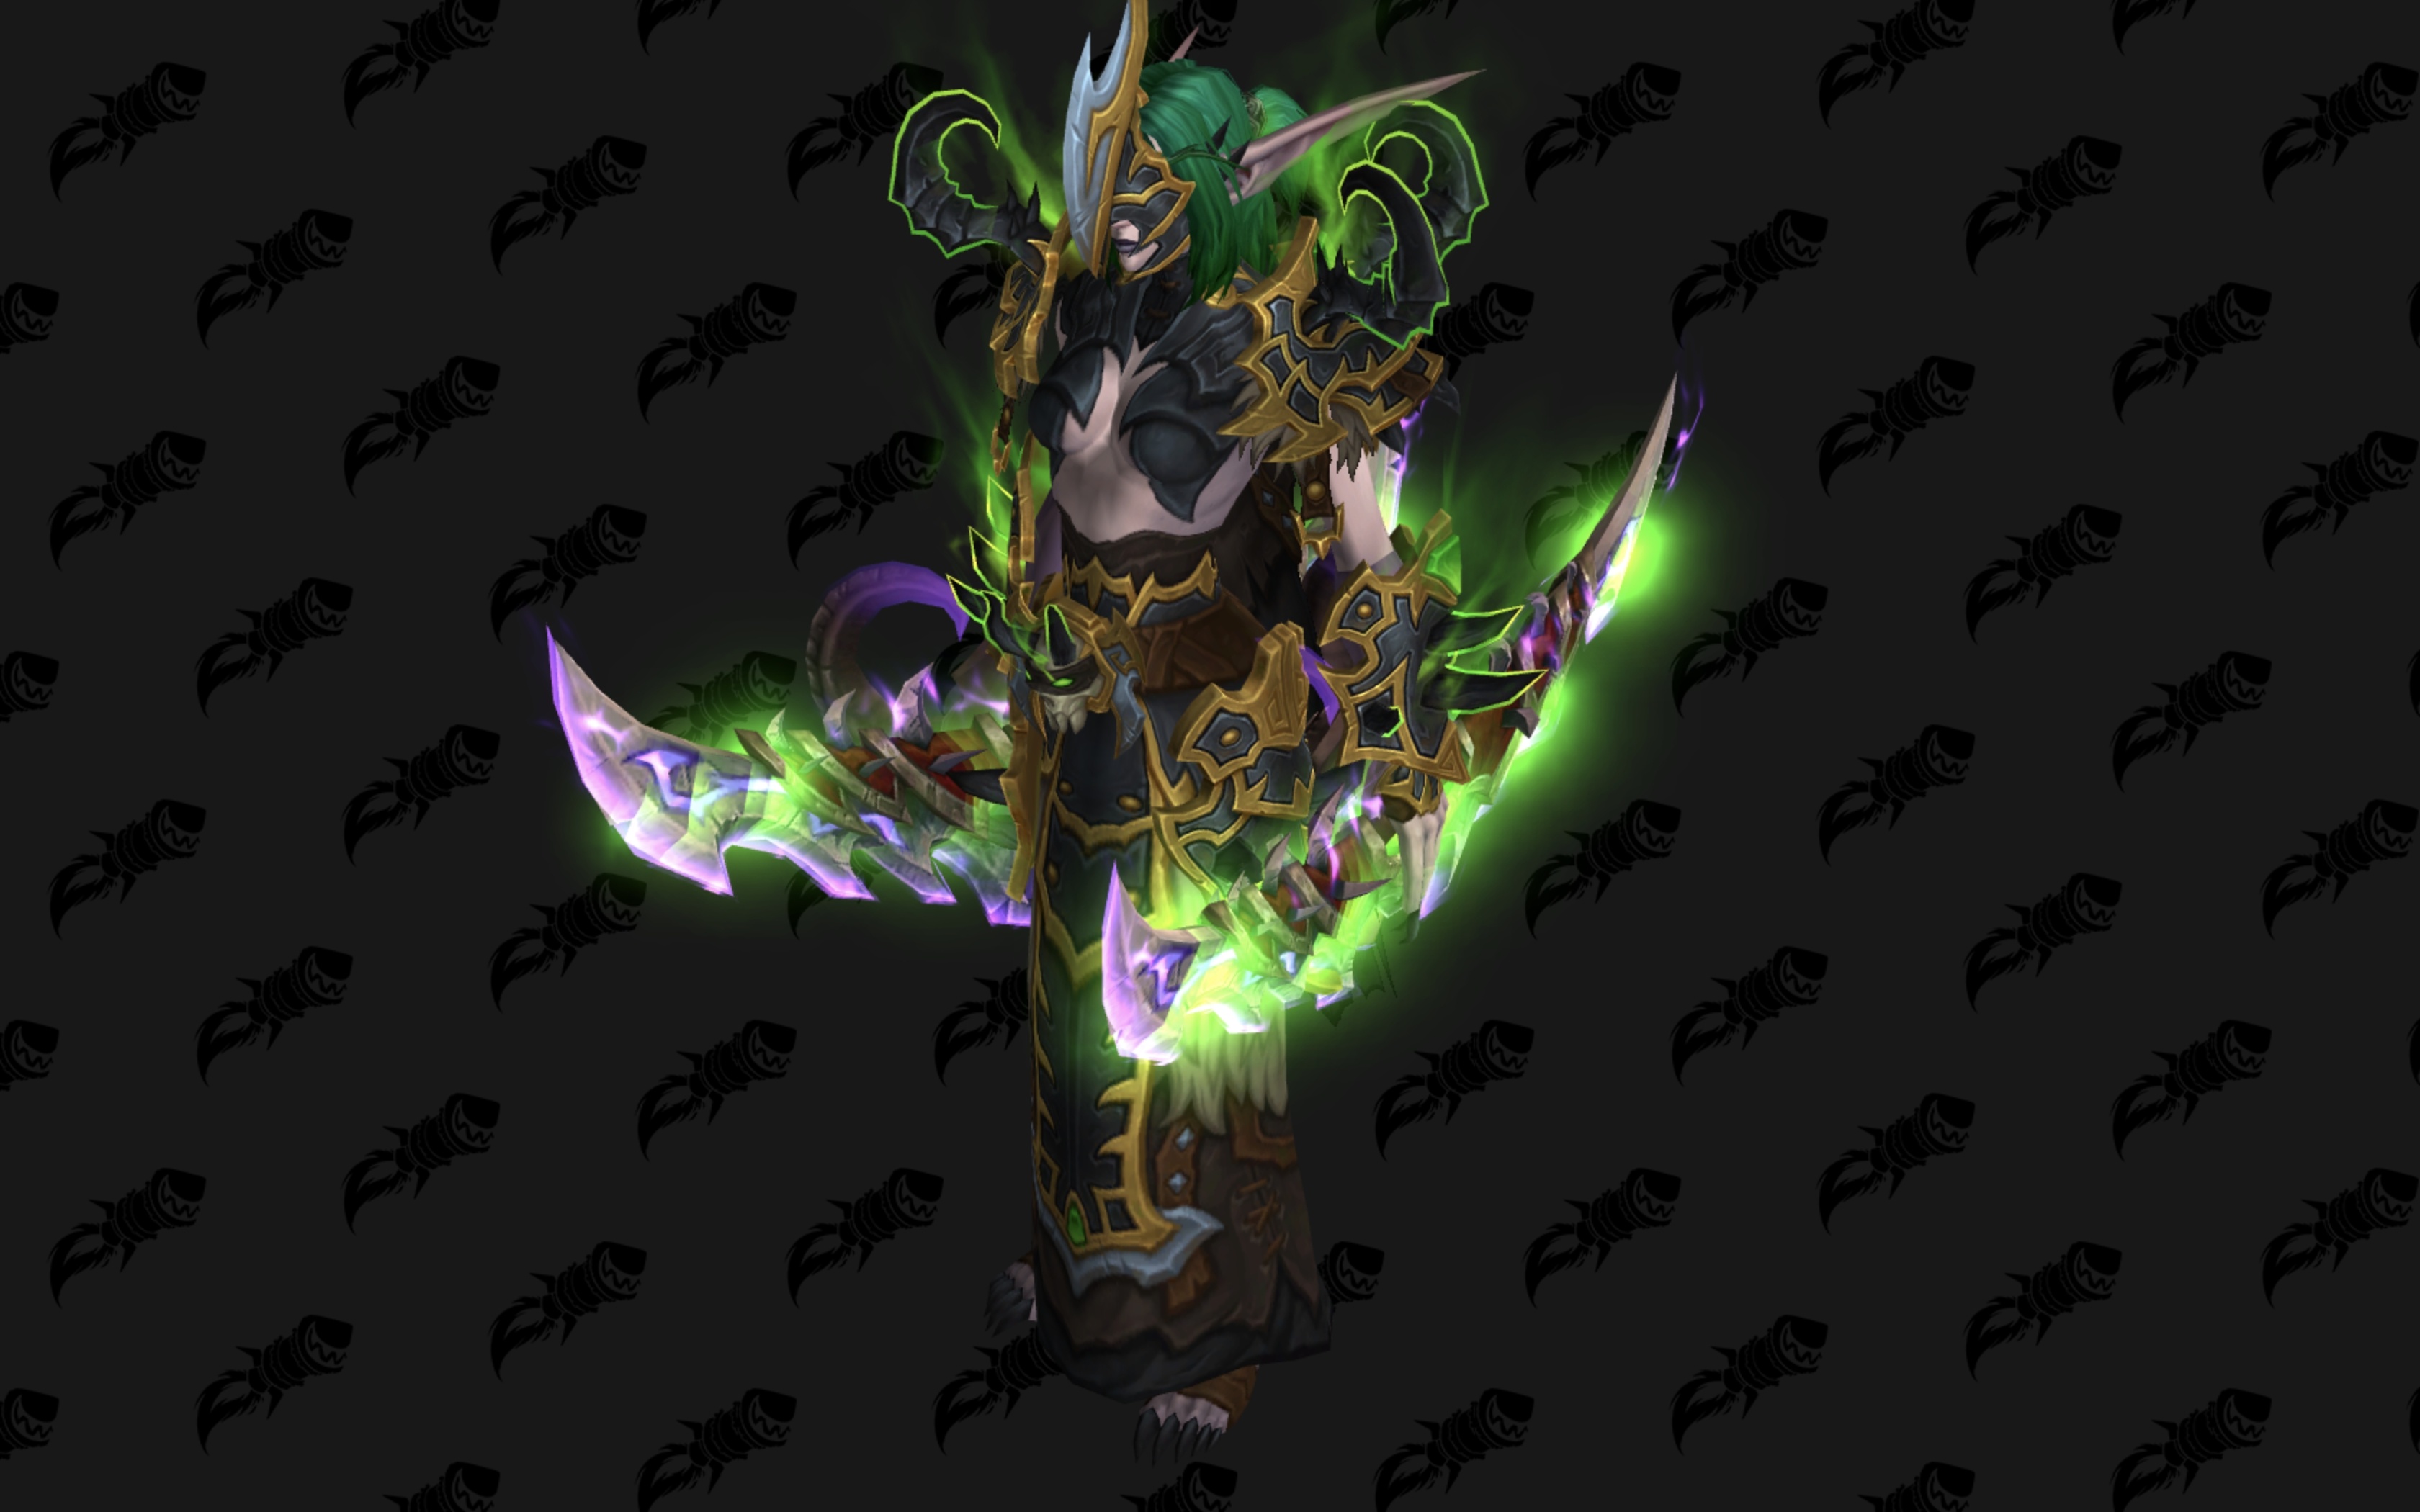 Weapon Illusion Glow Effects Now Available In The Wowhead Dressing